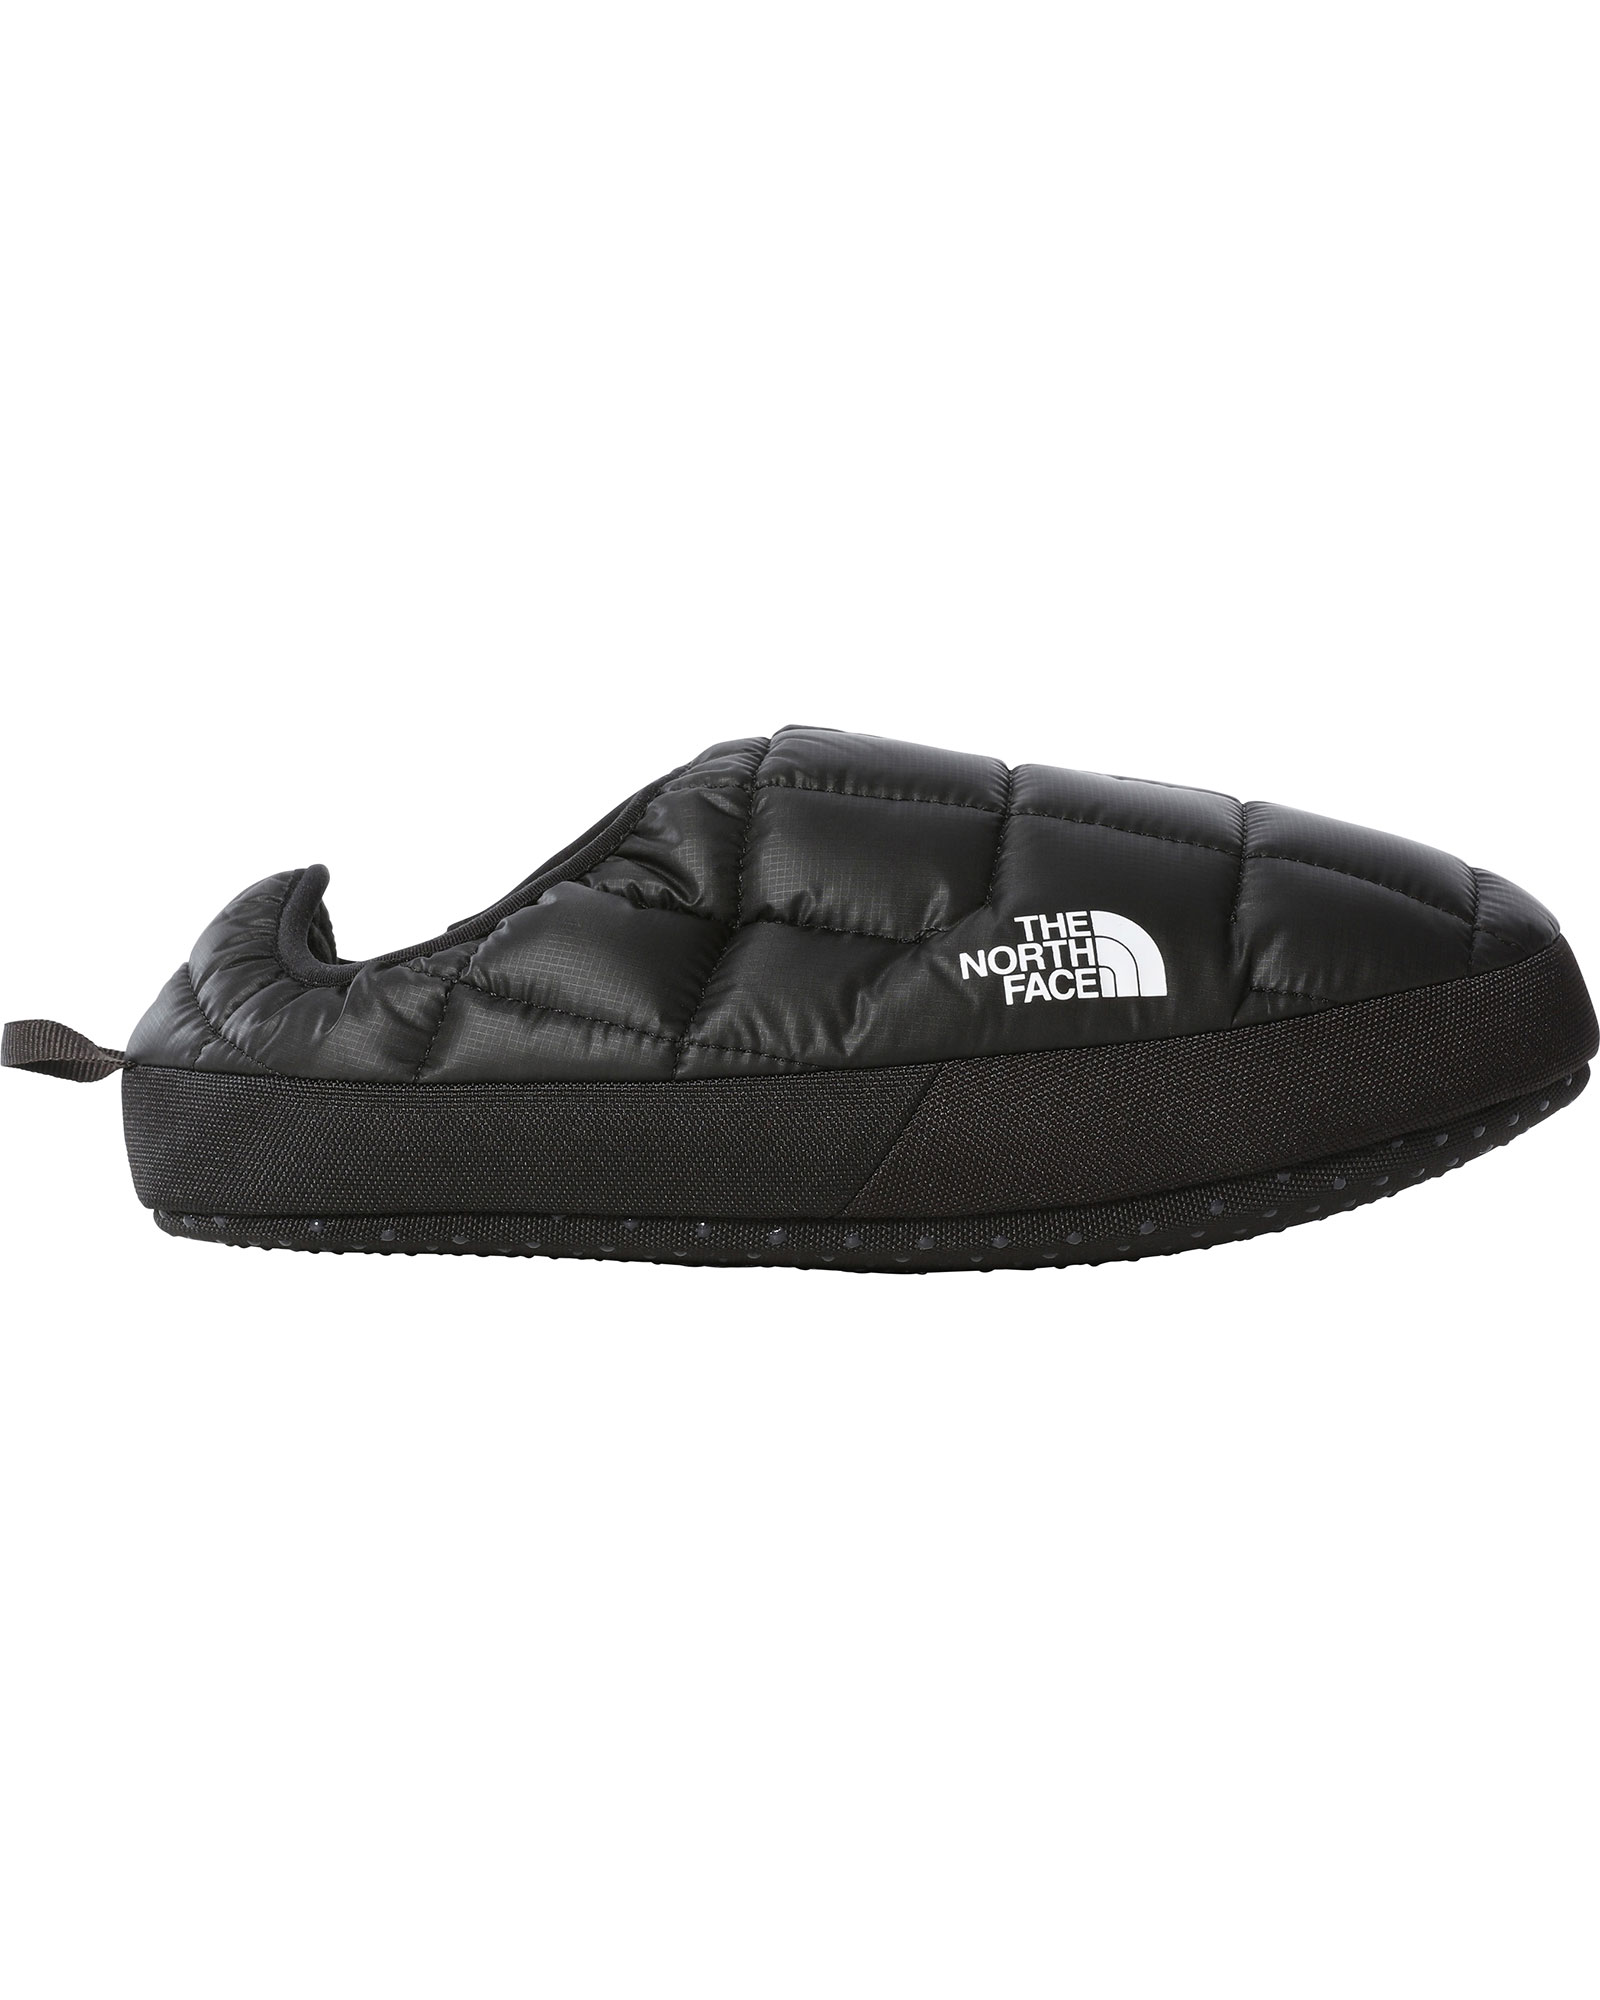 The North Face Women’s ThermoBall V Mules - TNF Black/TNF Black M